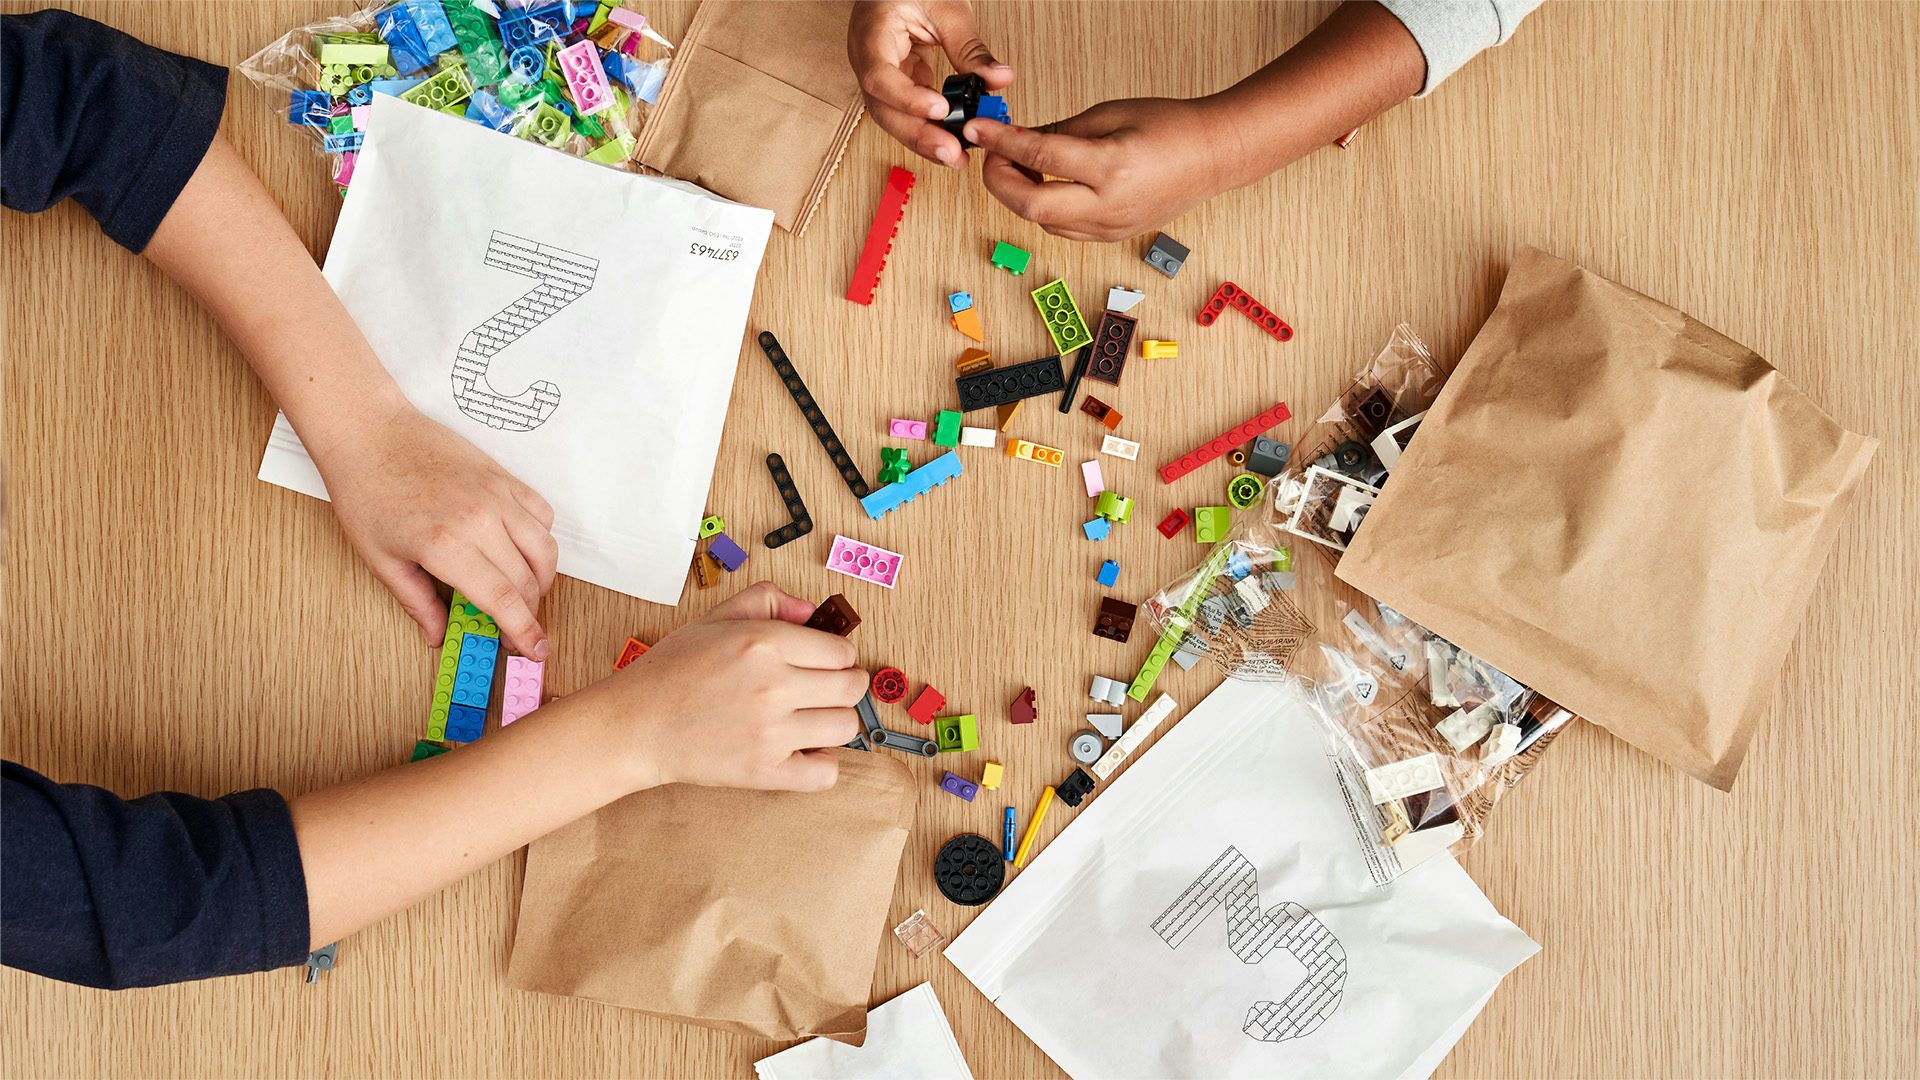 Overhead image the hands of two people playing with Lego pieces, and brown and white paper bags numbered '2' and '3' scattered on a table